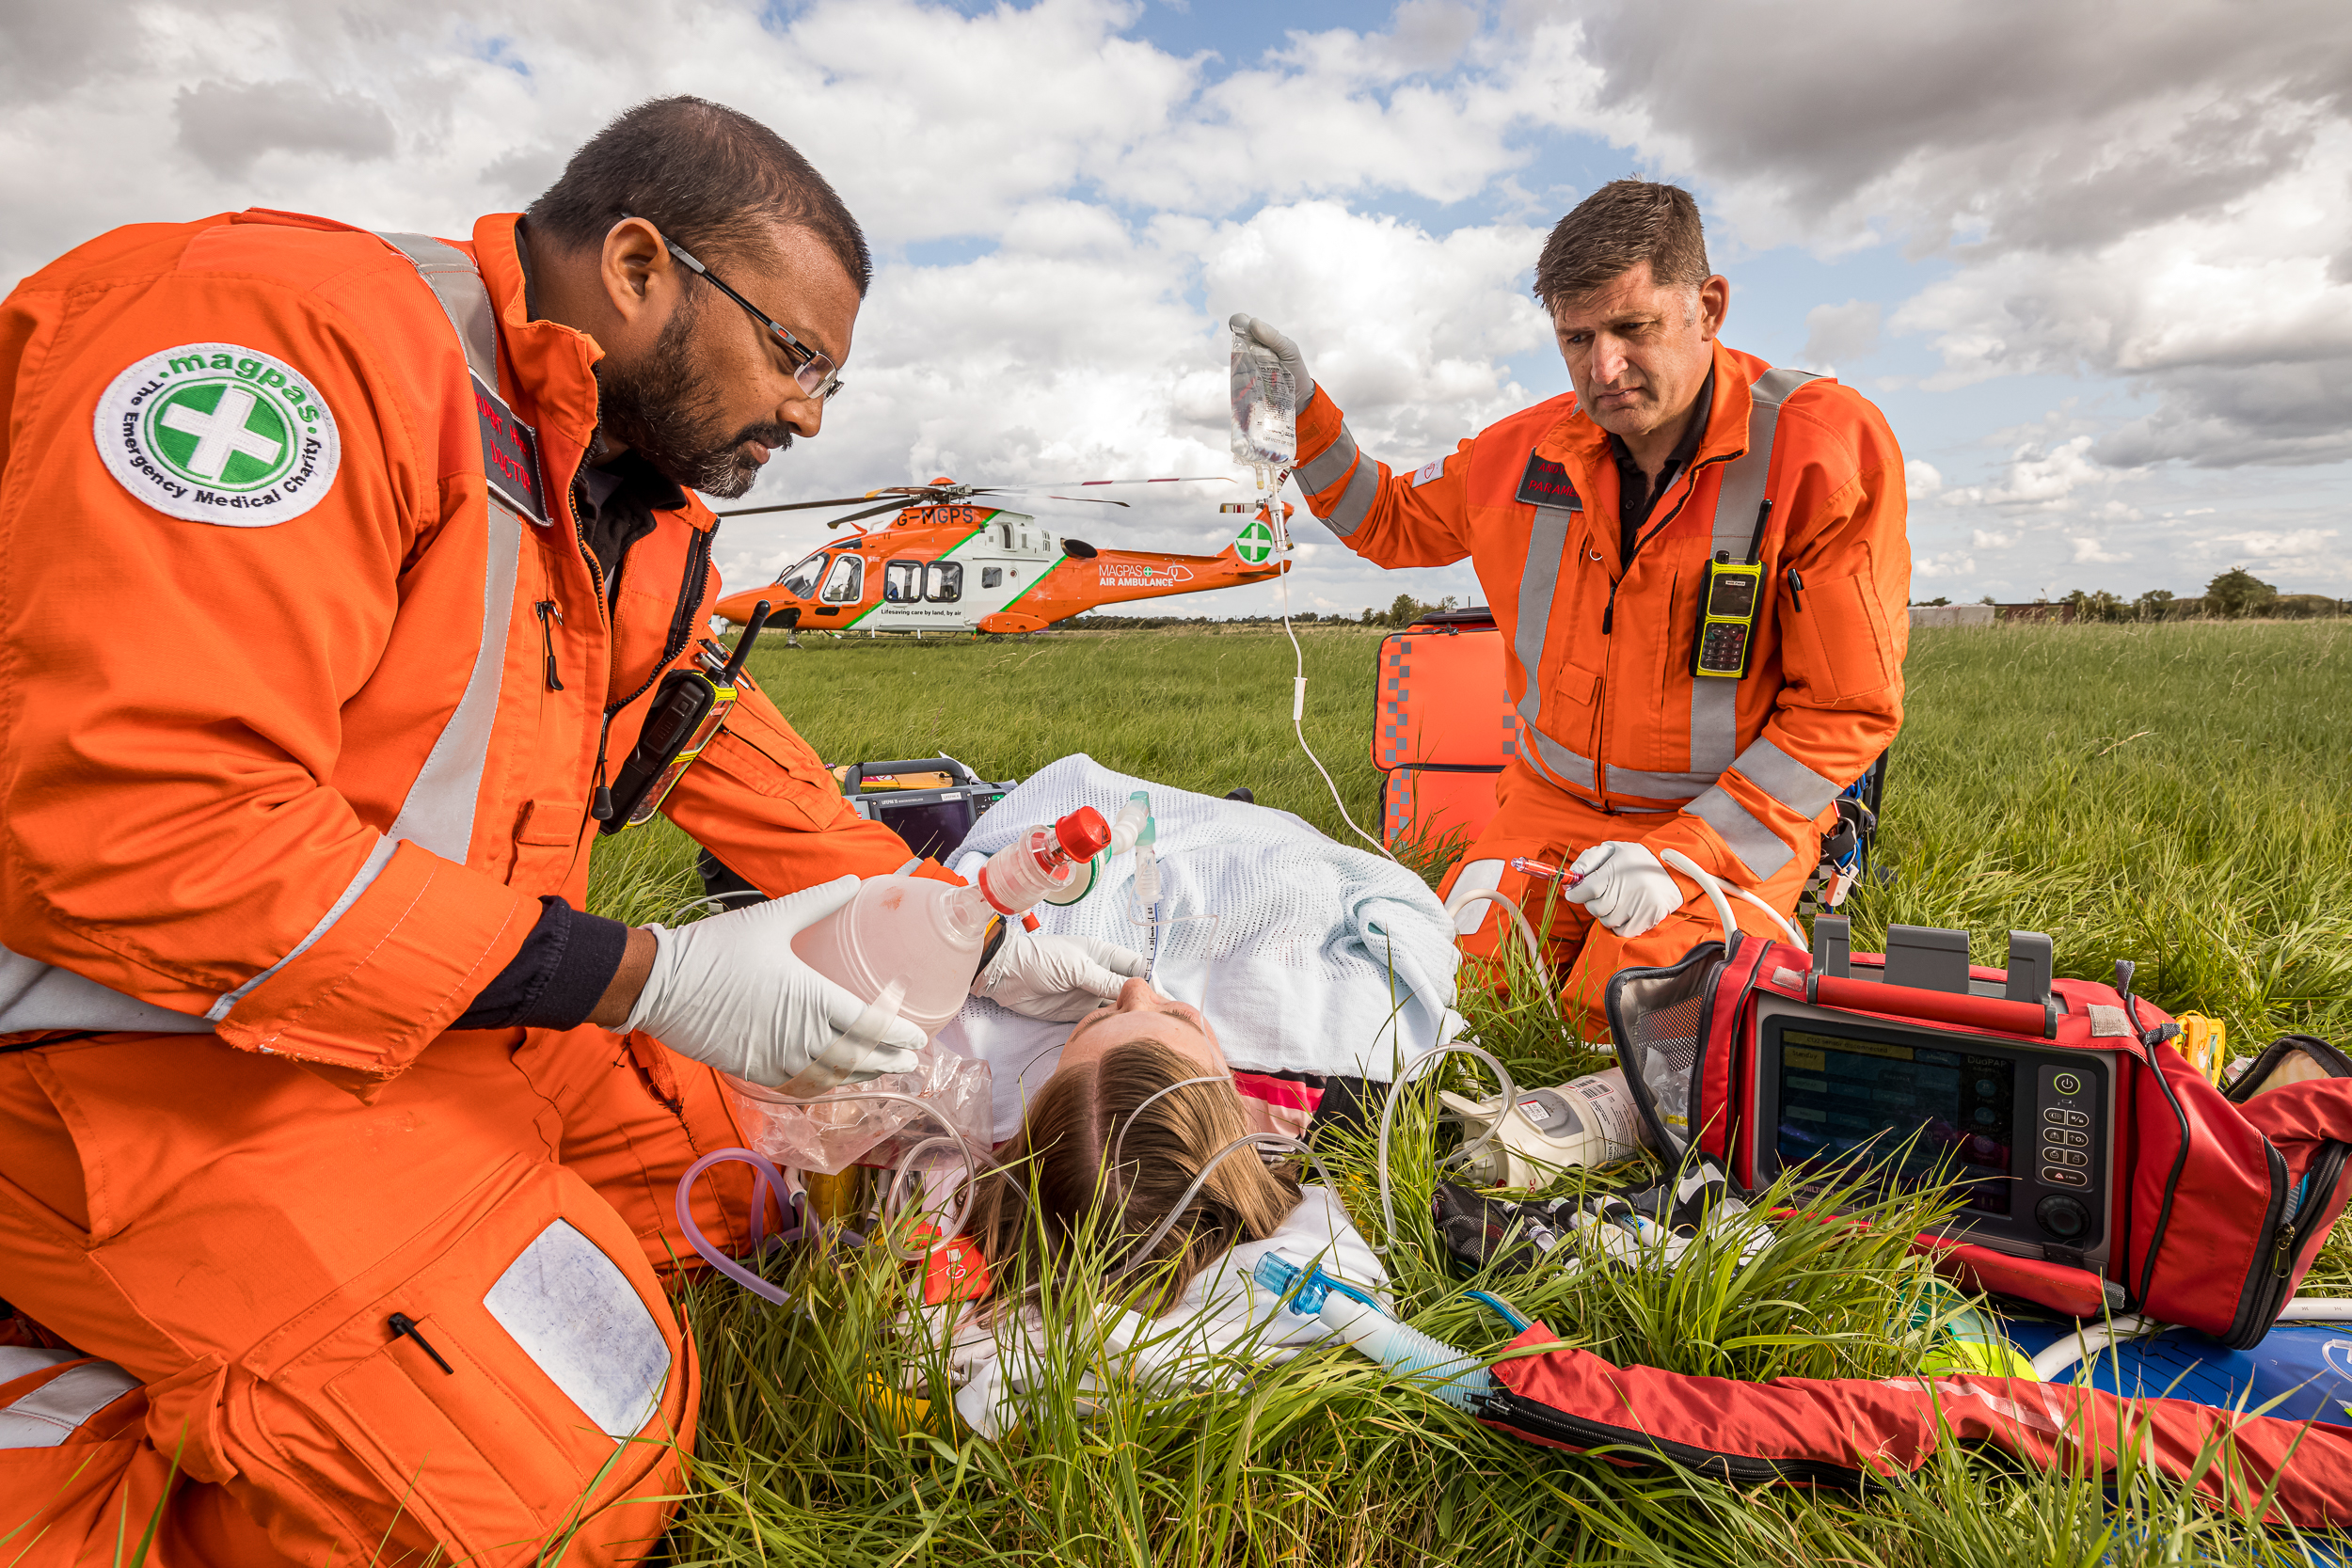 Two paramedics tend to patient on grass.